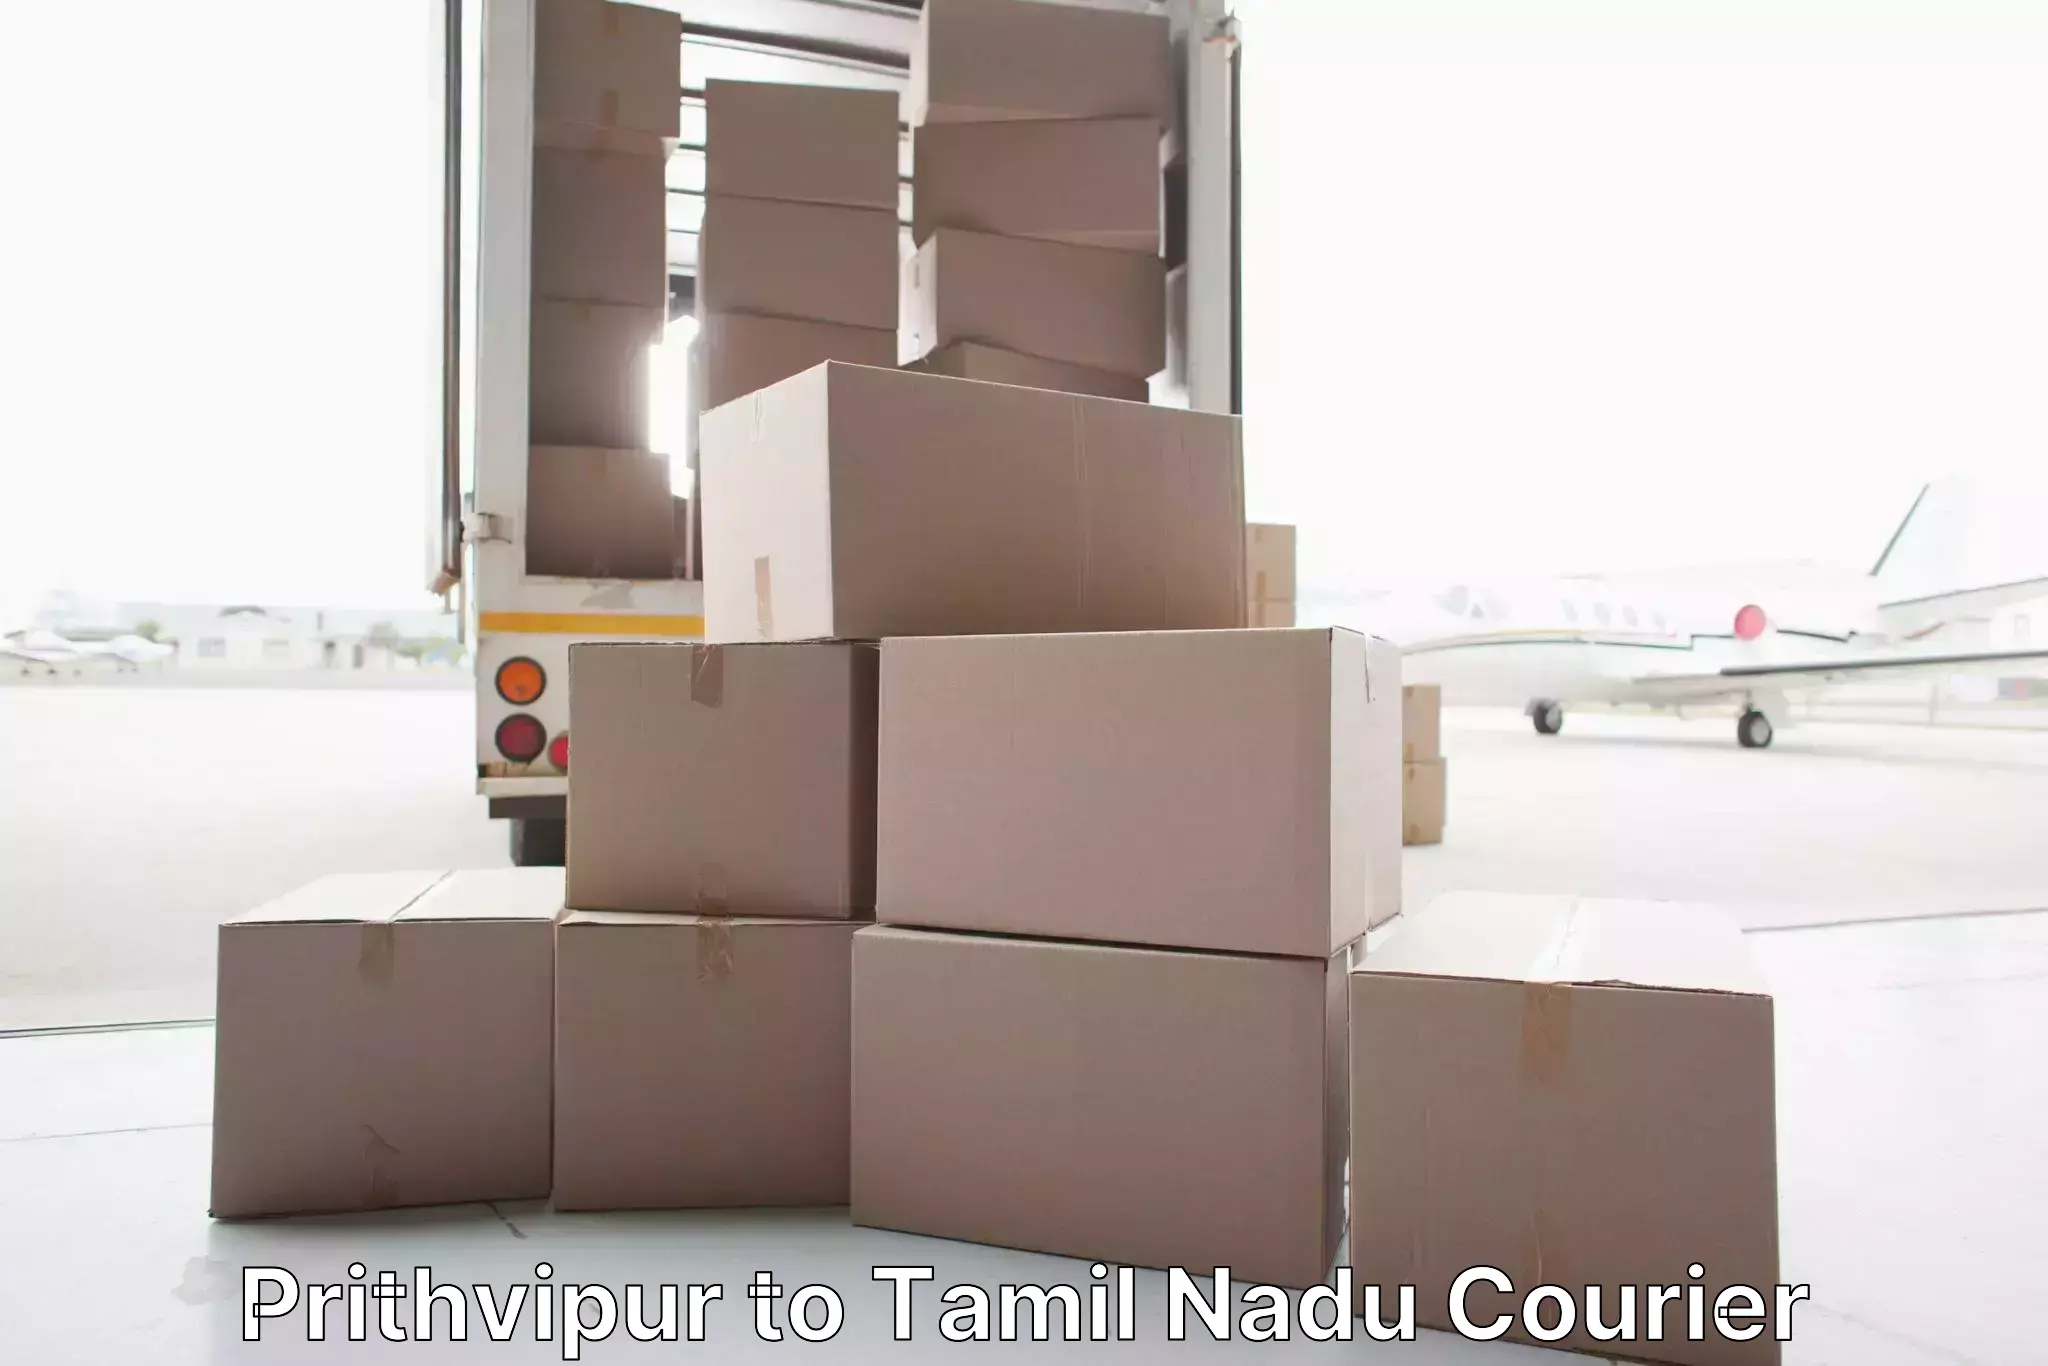 Professional furniture movers in Prithvipur to Kudankulam